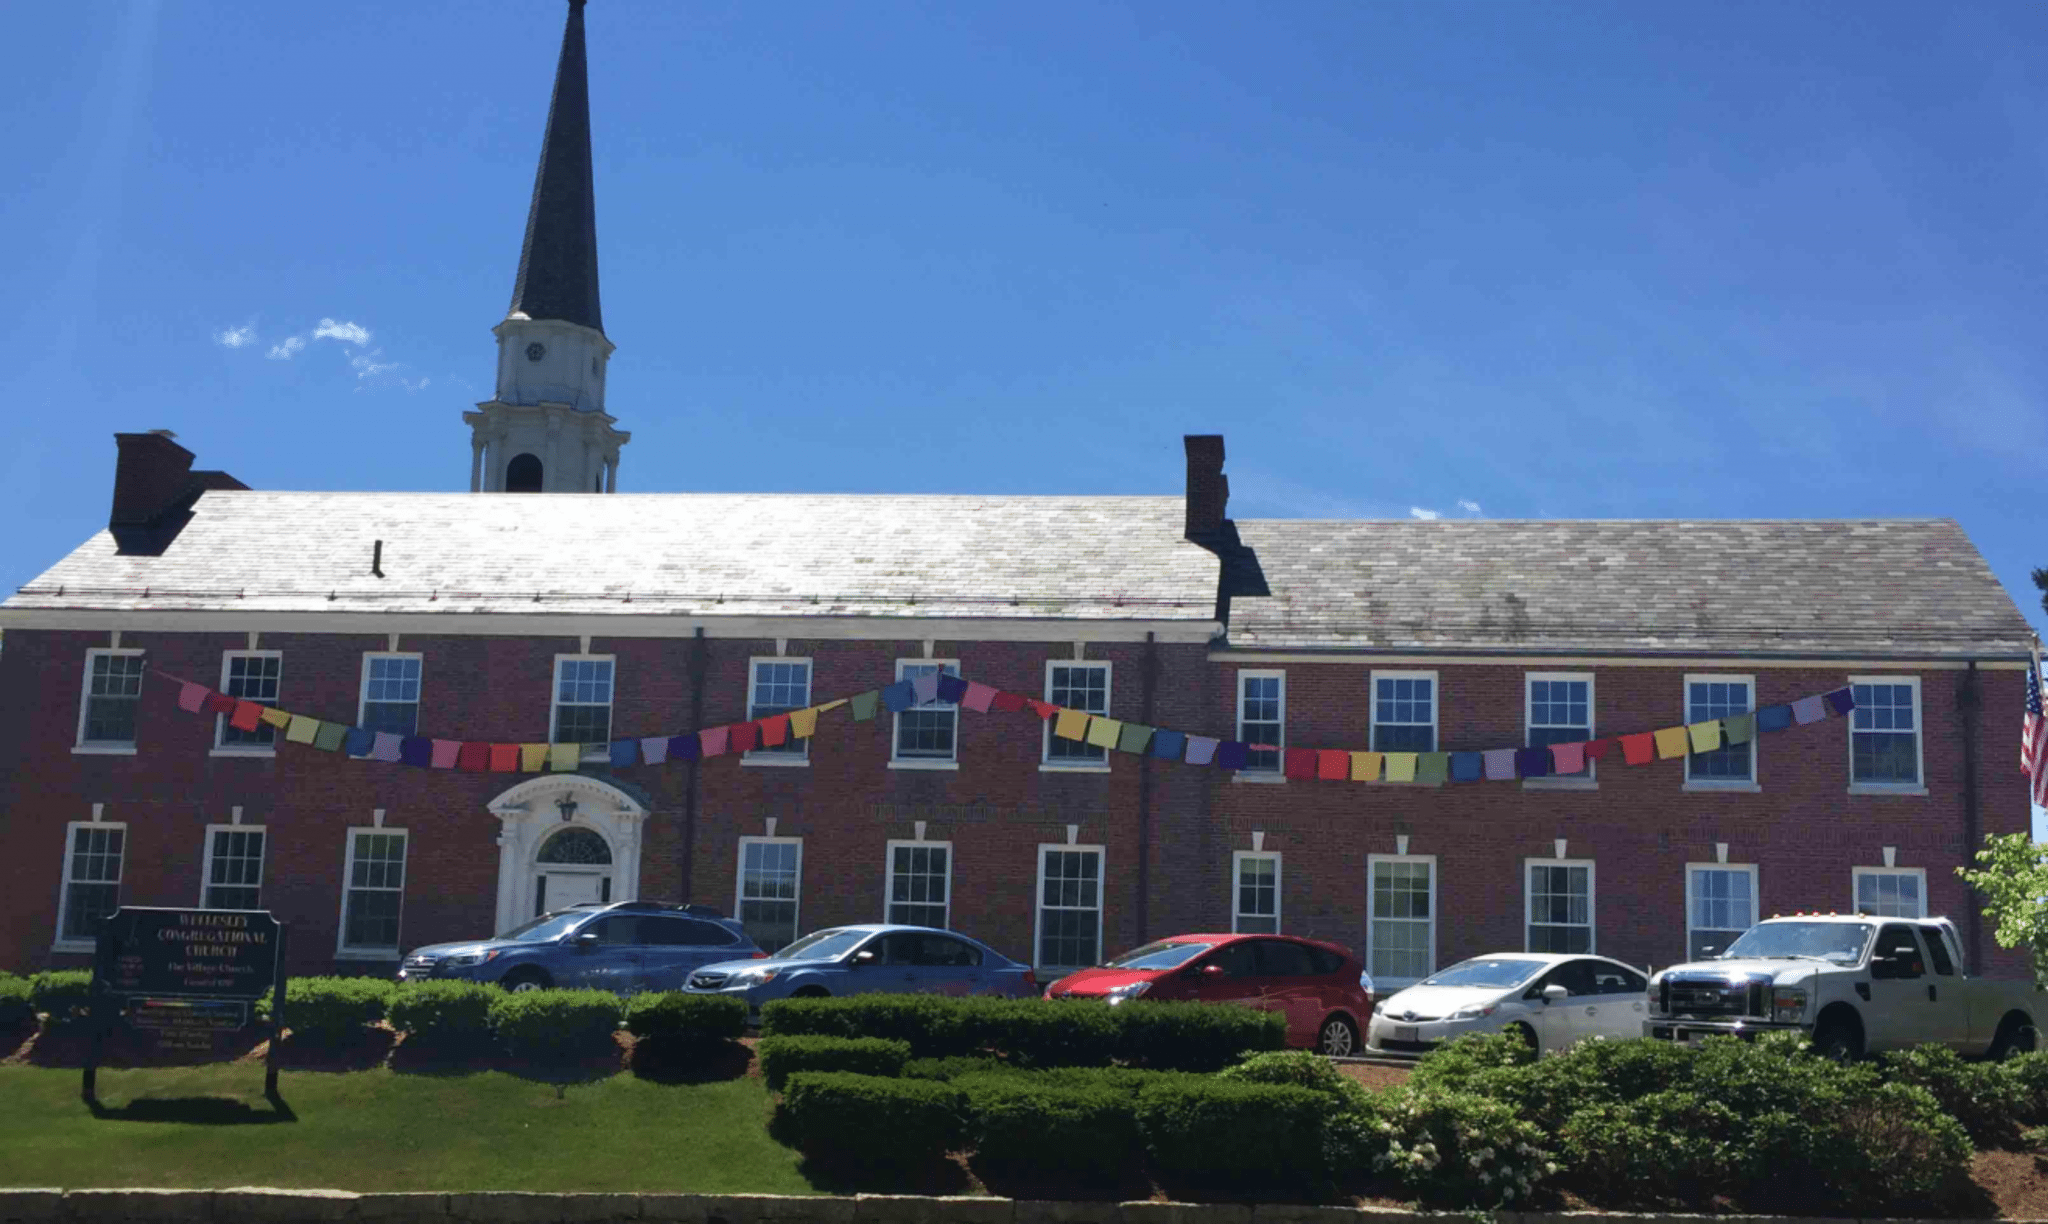 Prayer flags across the facade of the Central St. side of Wellesley Village Church. Photo credit: Village Church